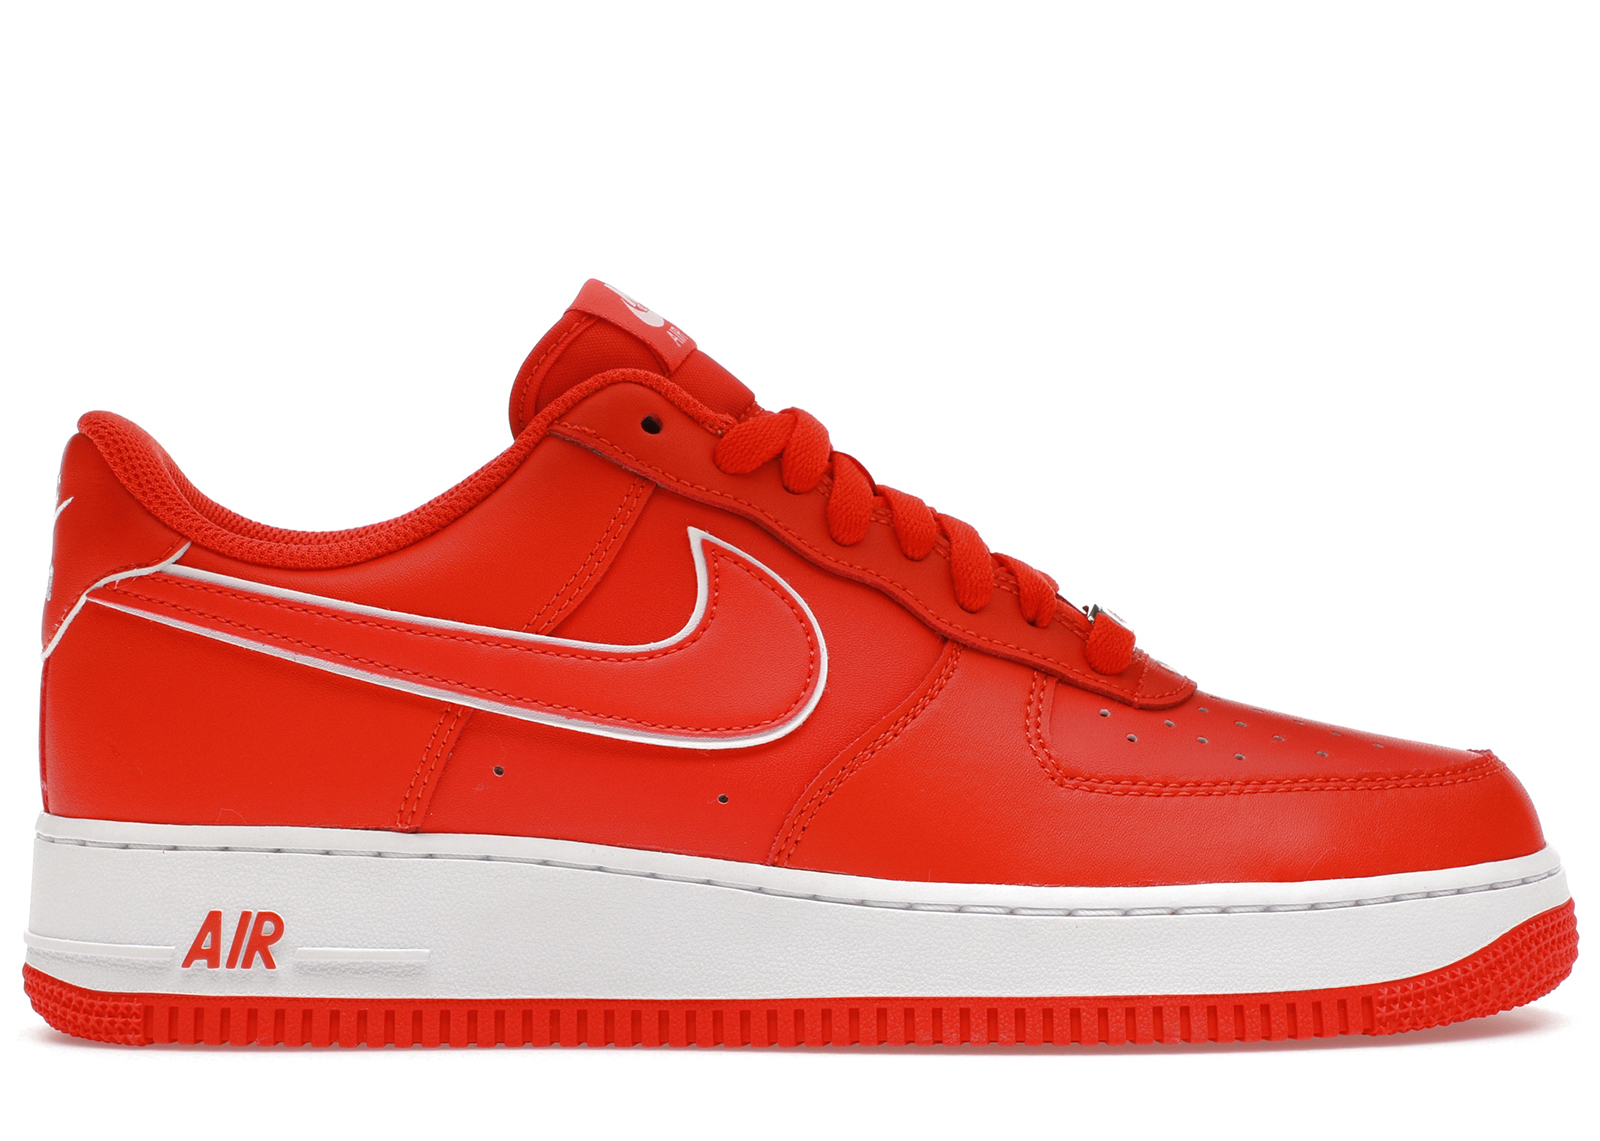 Nike Air Force 1 Low 07 Picante Red White Men's - DV0788-600 - US